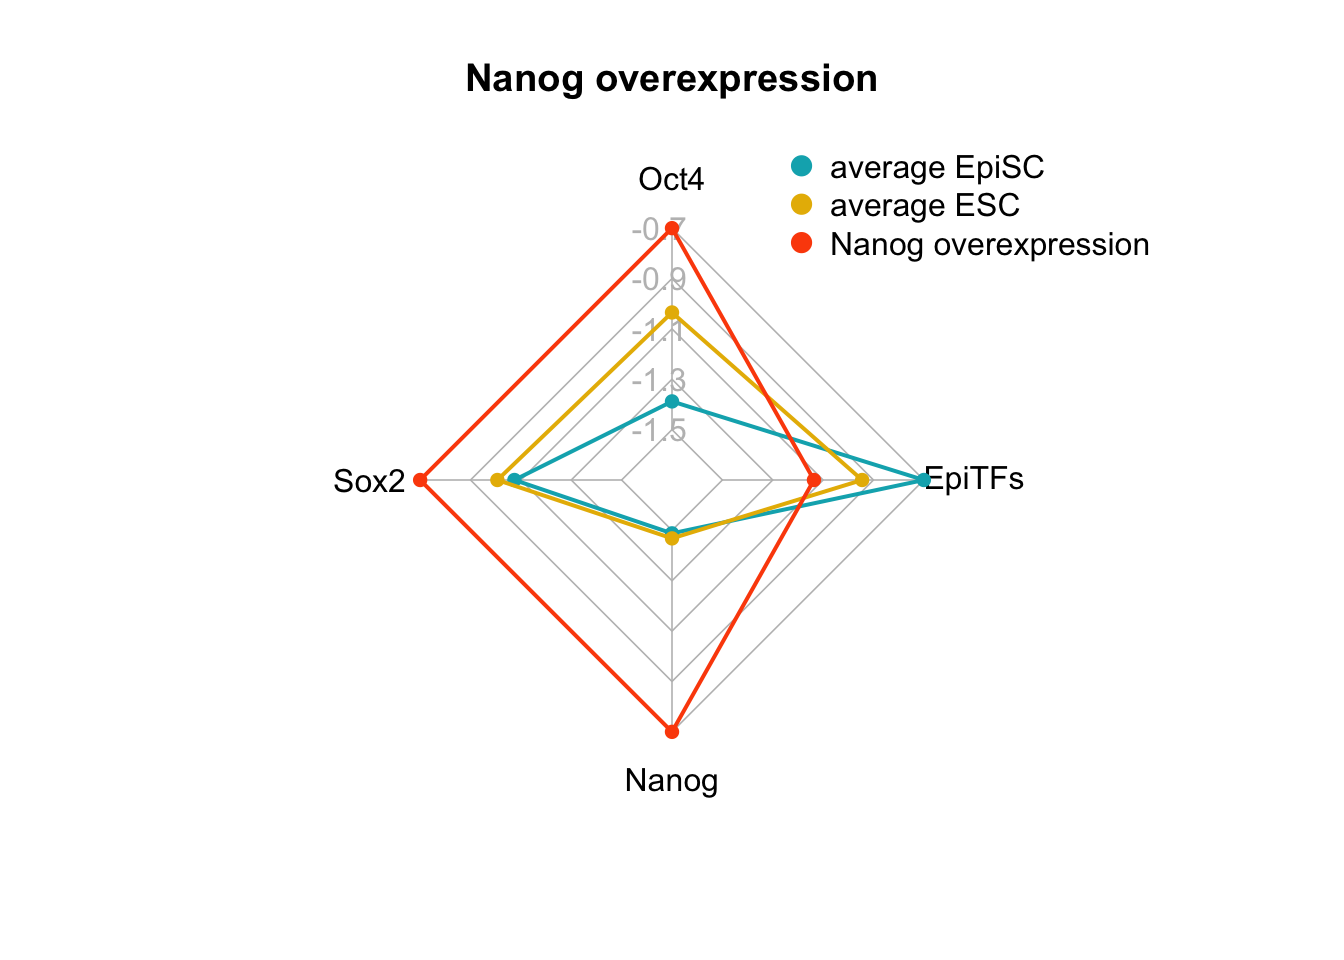 radar charts of the steady-state values of 4 internal-marker nodes for Nanog overexpression and Klf4 overexpression perturbation